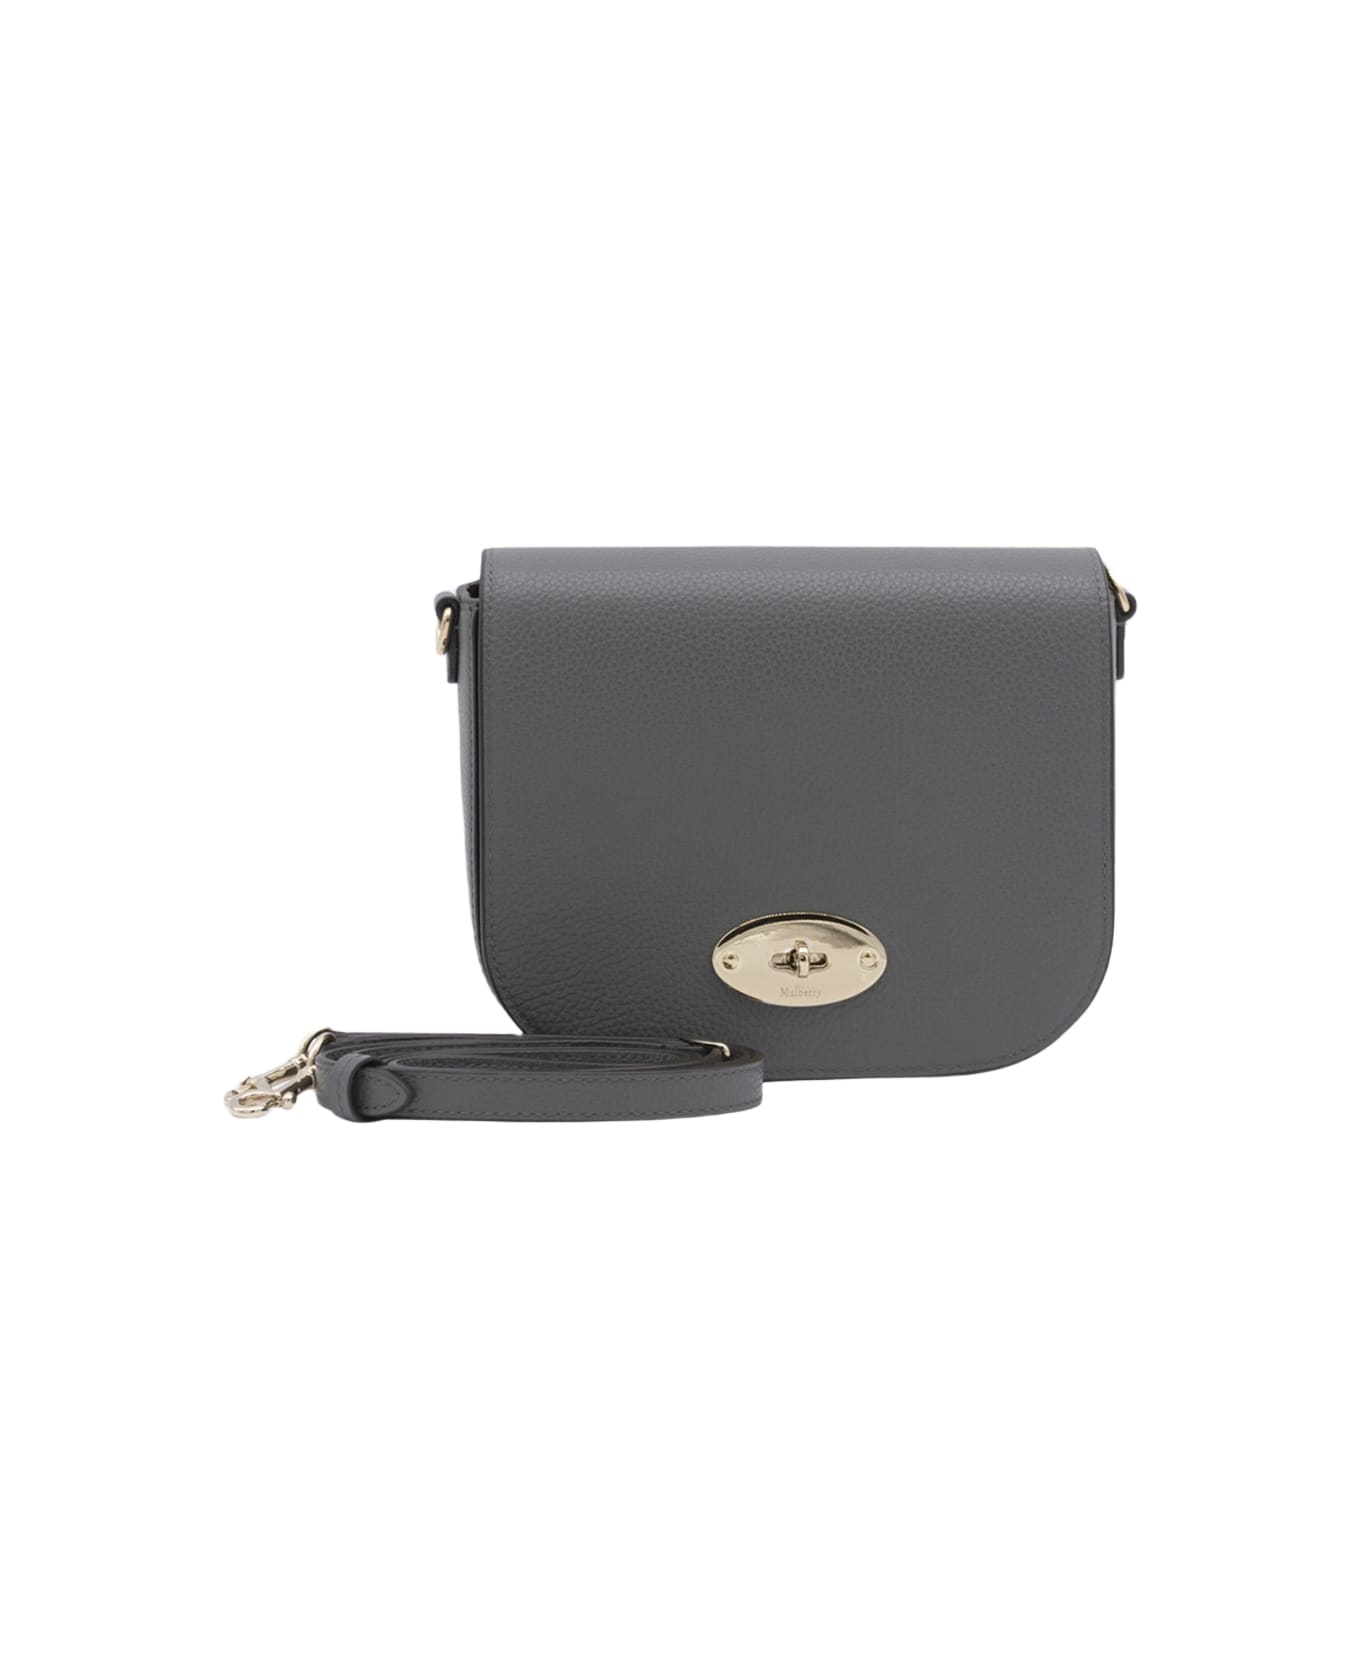 Mulberry Grey Leather Darley Crossbody Bag - Charcoal トートバッグ